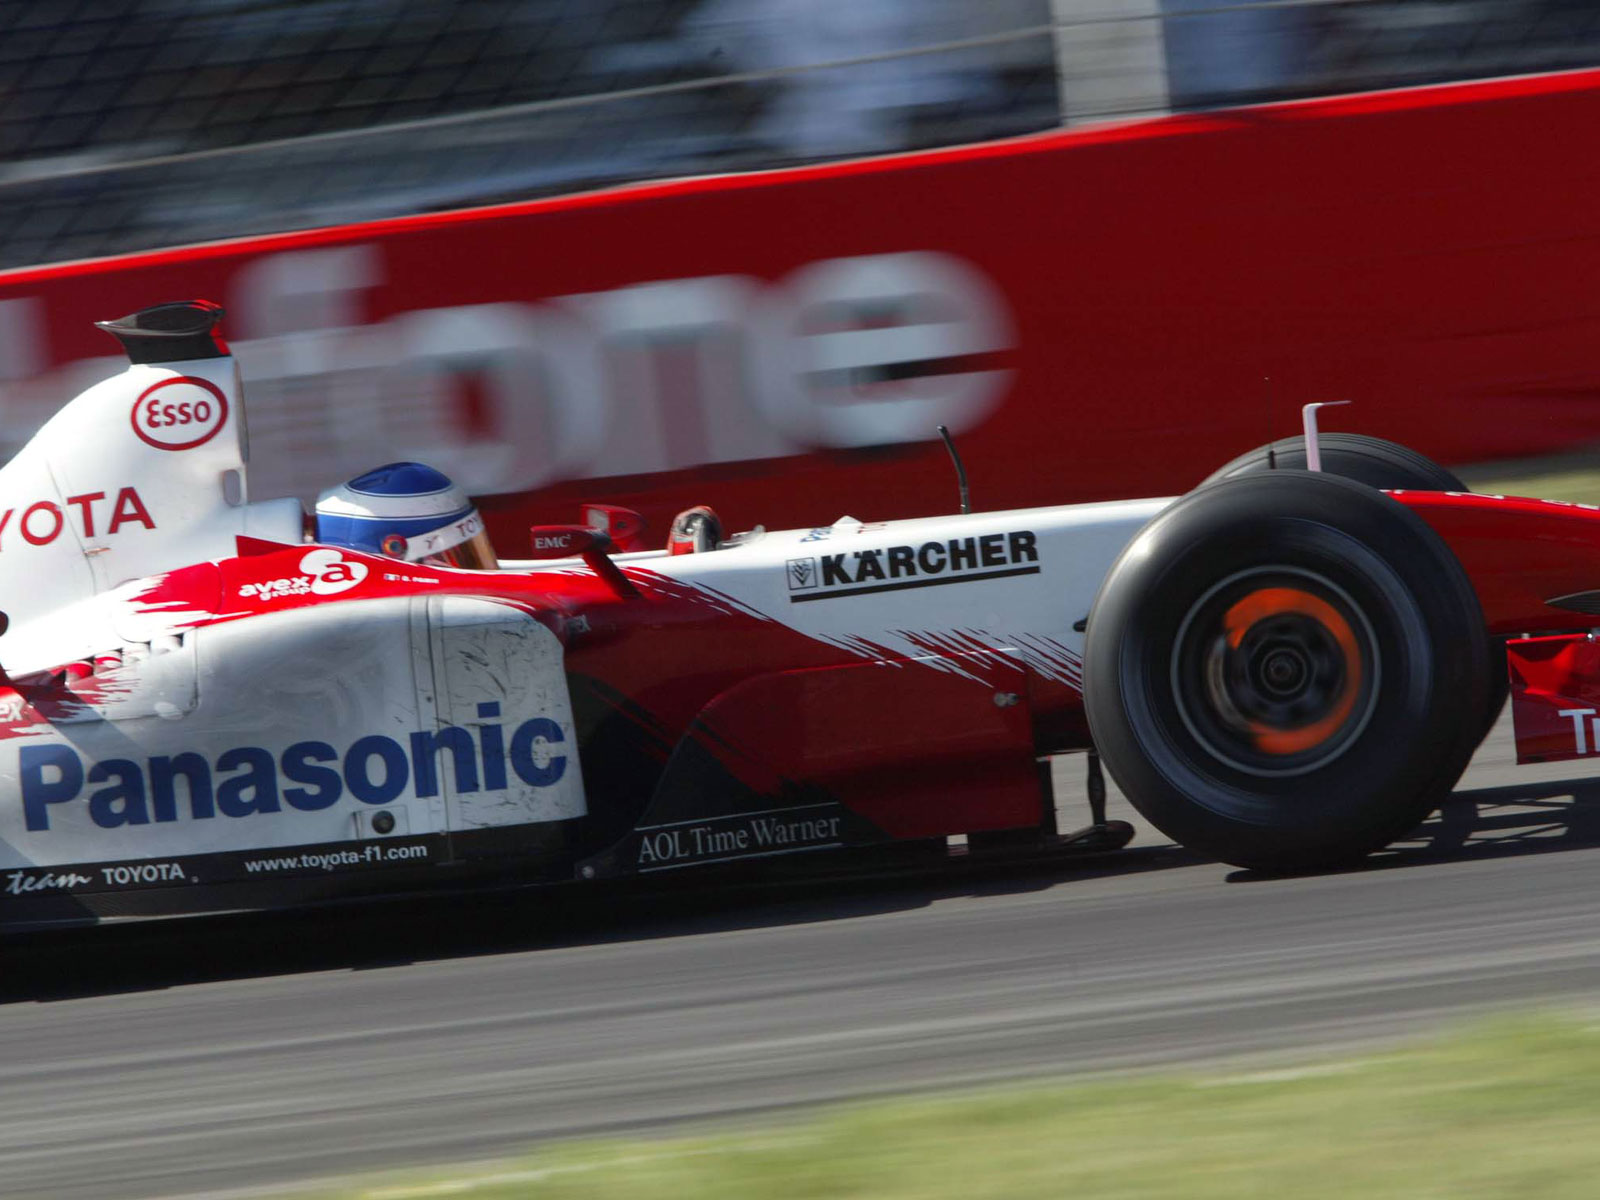 HD Wallpapers 2003 Formula 1 Grand Prix of Italy | F1 Fansite